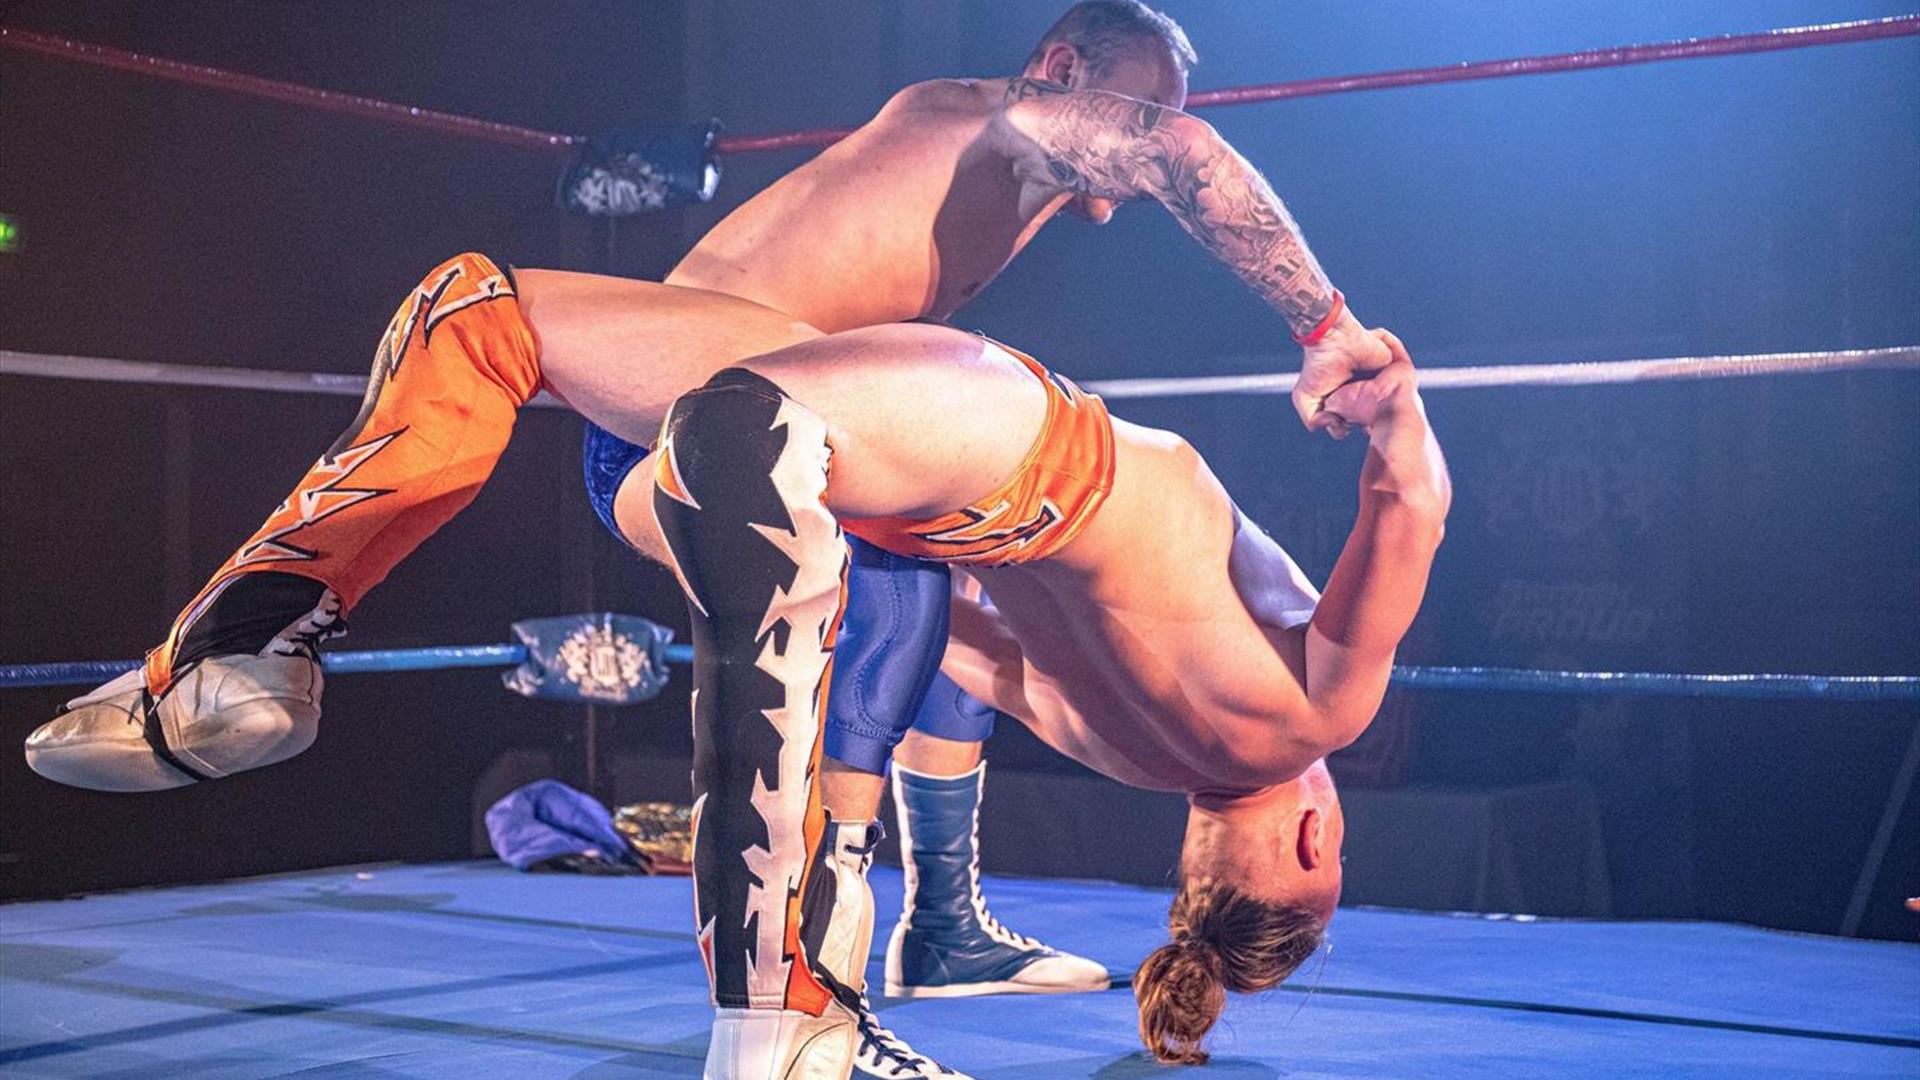 Image is of two wrestlers performing in the ring